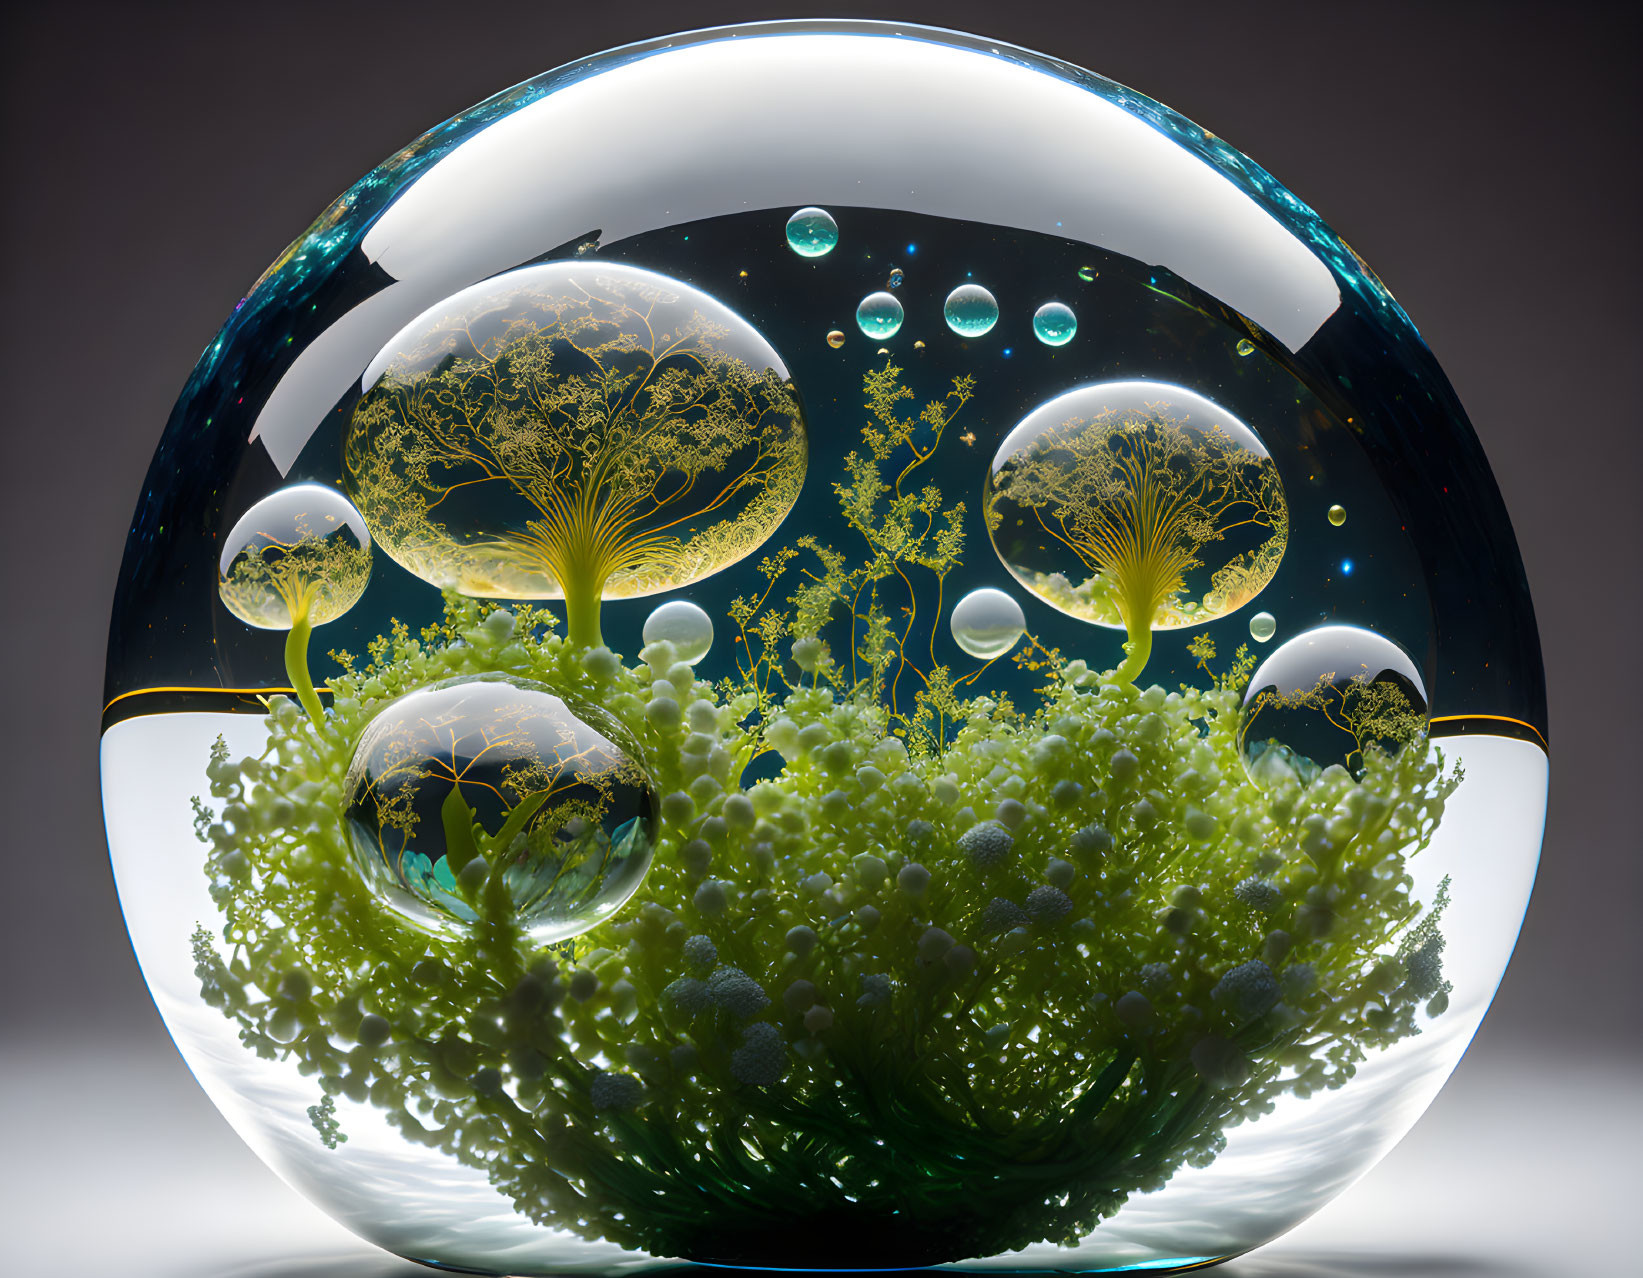 Spherical Glass Paperweight with Green and Yellow Tree-Like Structures